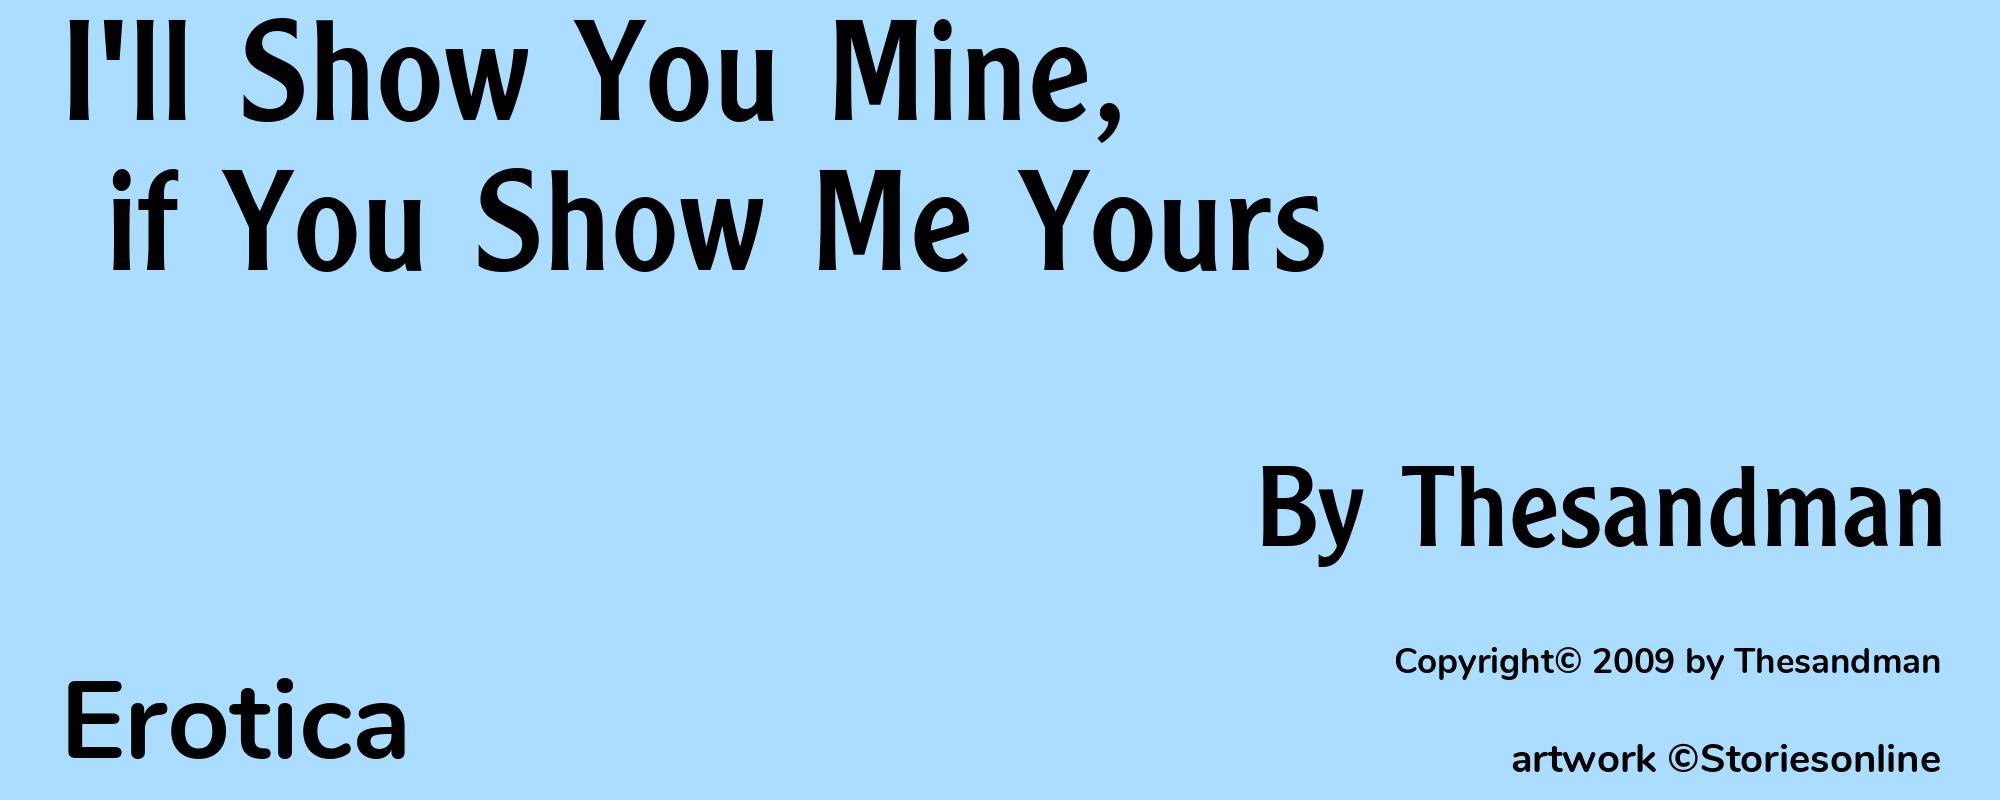 I'll Show You Mine, if You Show Me Yours - Cover